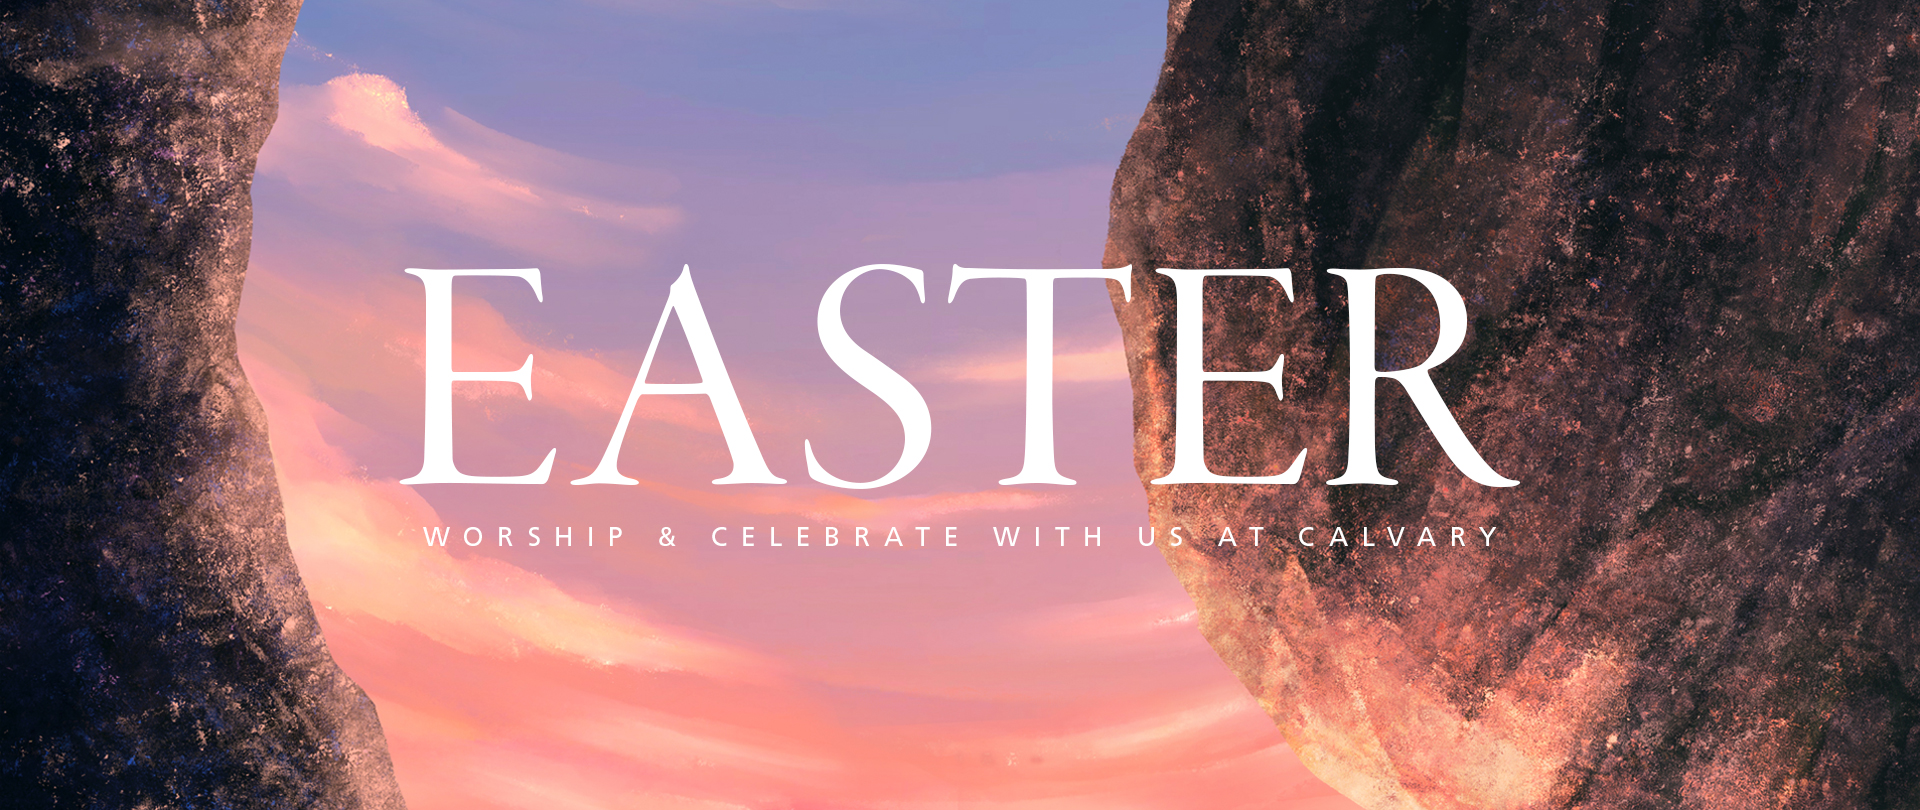 CELEBRATE EASTER
Good Friday & Easter Sunday
Watch Again!
